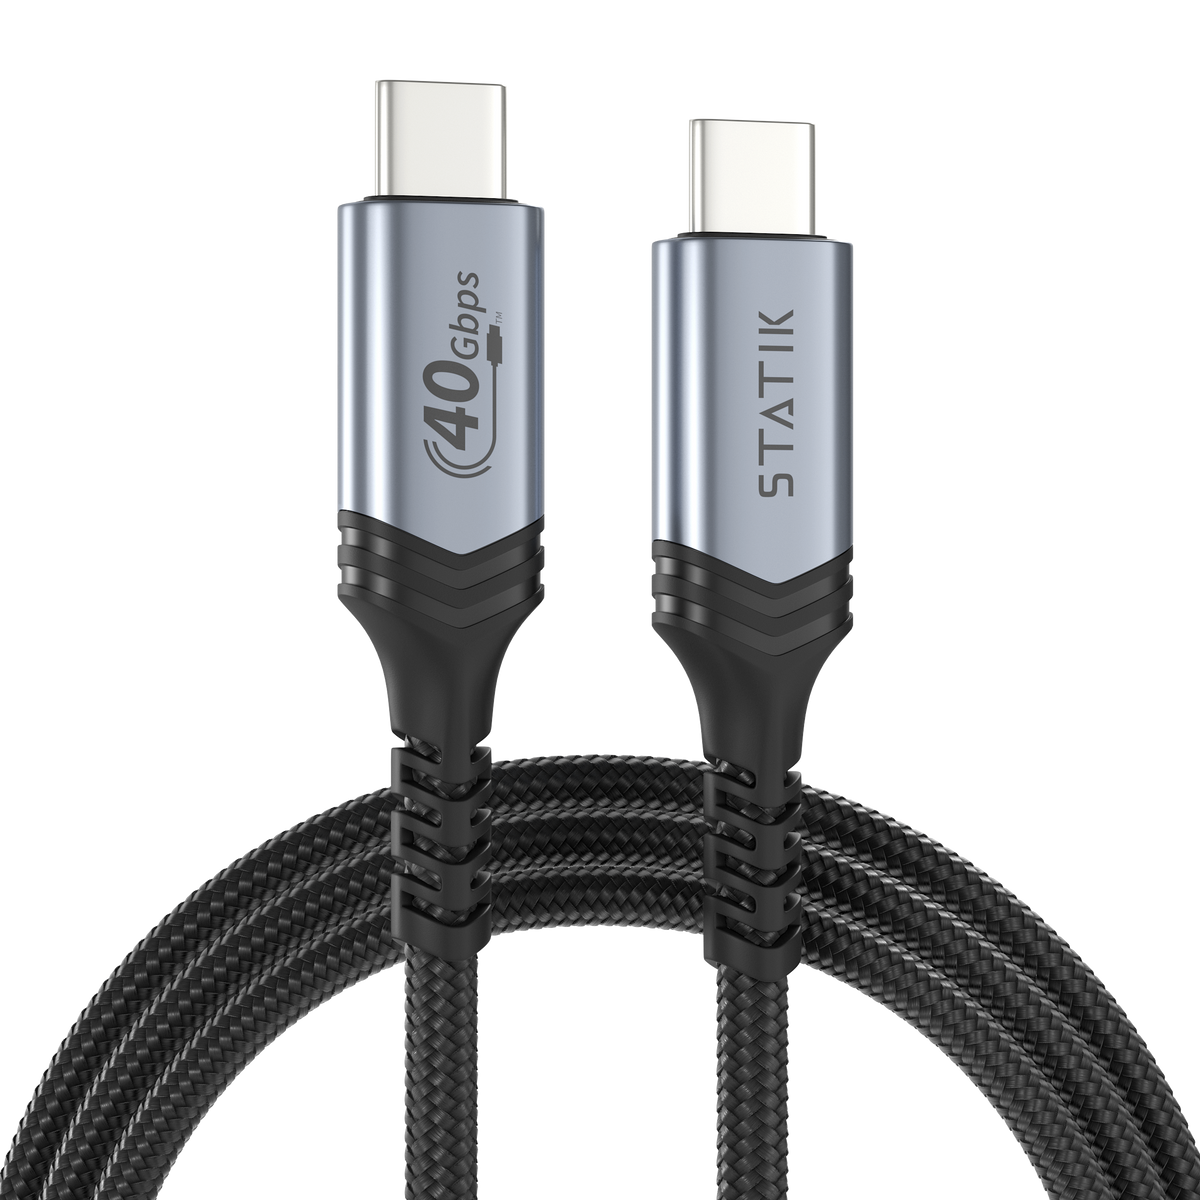 Ultra4 Cable | 3 ft | 240W Charging | 40GBPS Data Transfer | Last Chance Gear